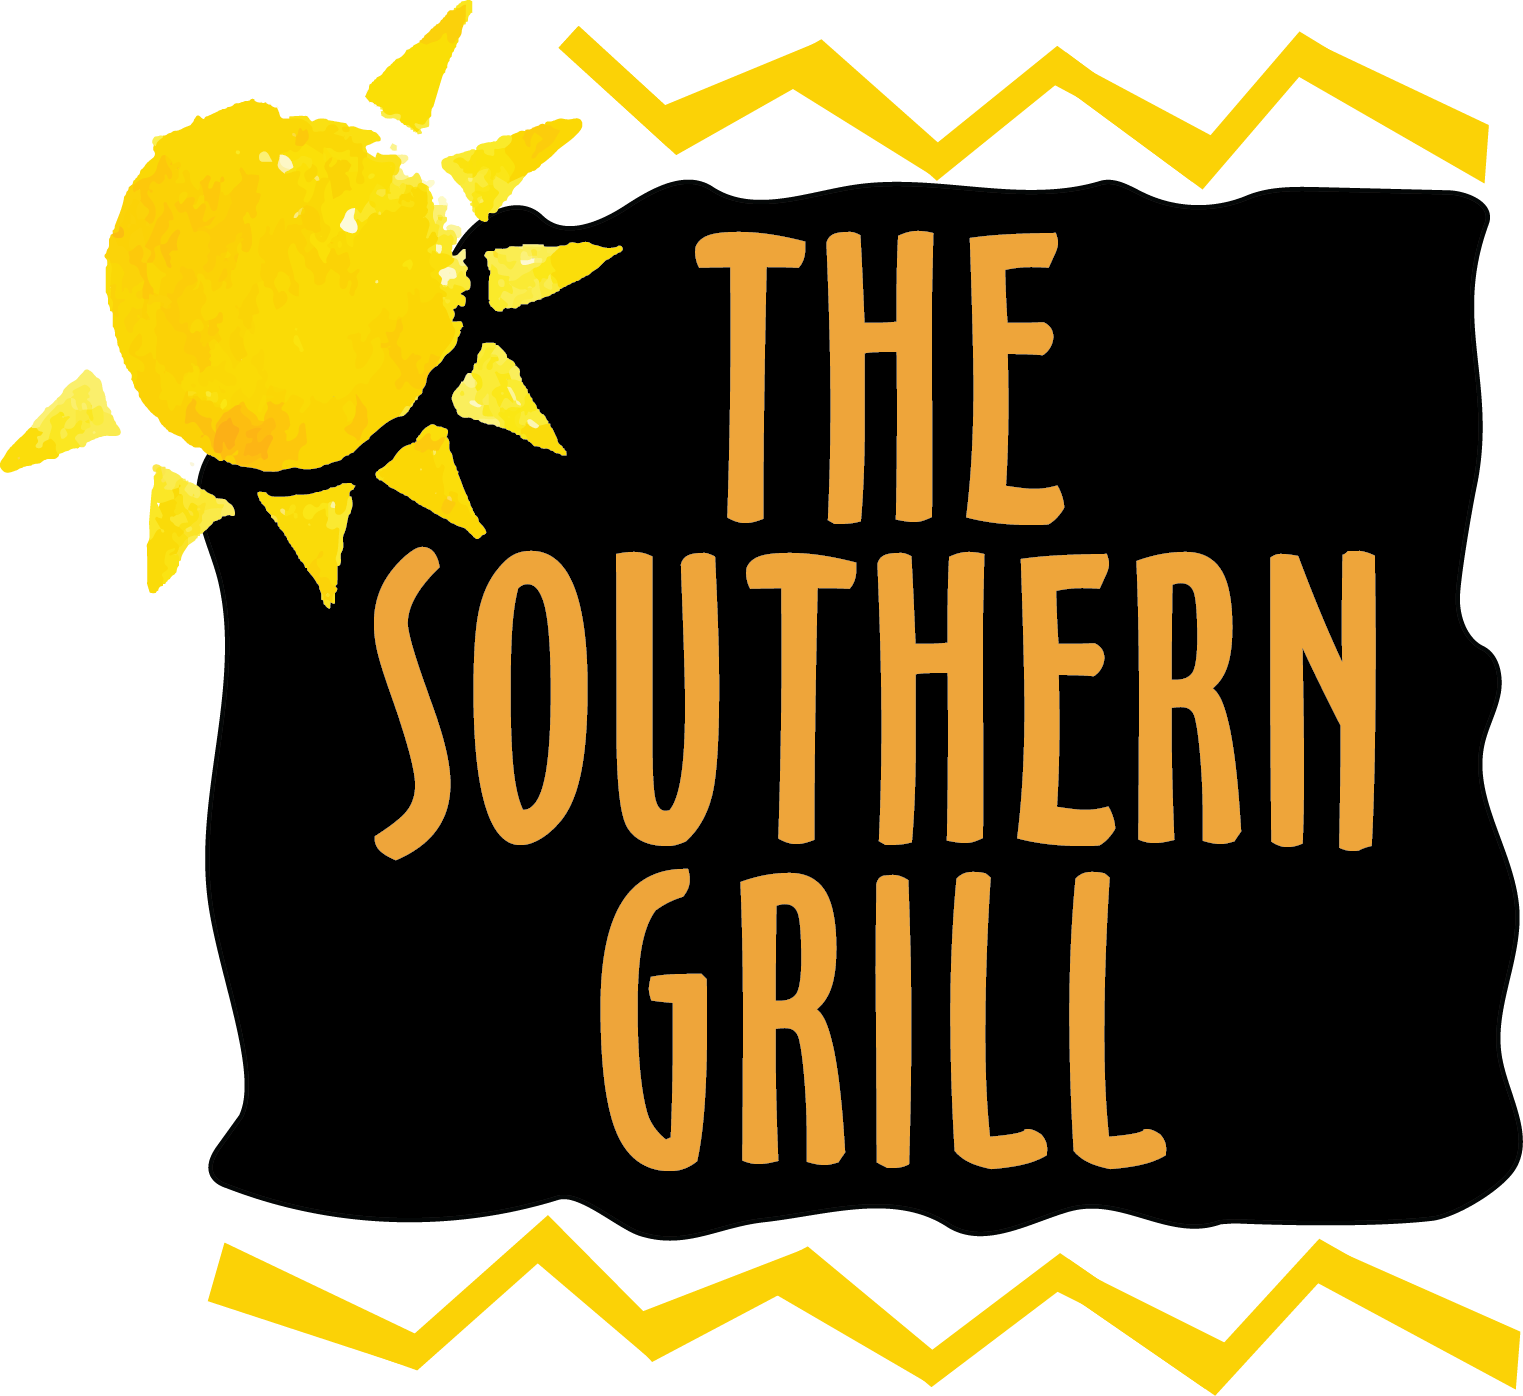 Lunch - Southern Grill Jacksonville Fl (1523x1396)